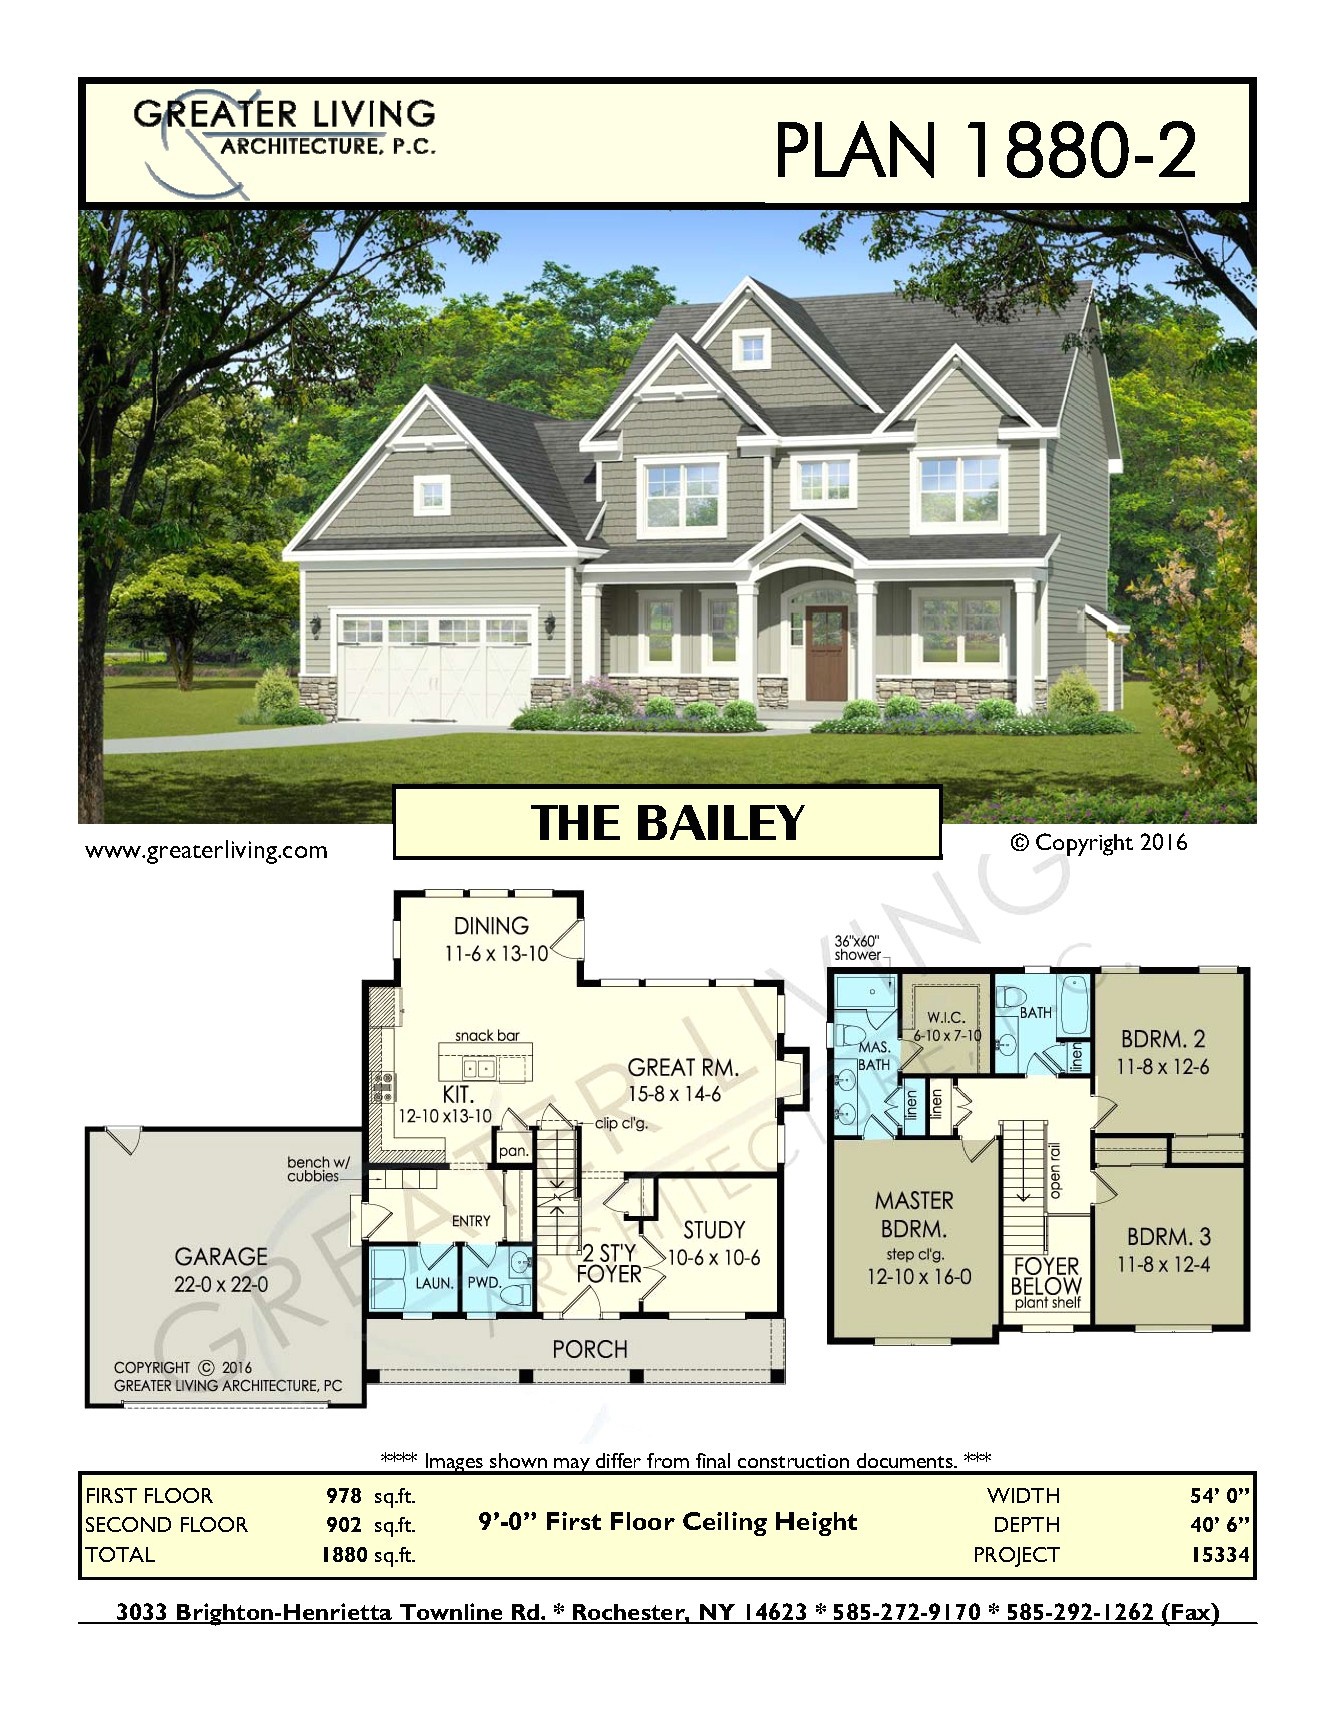 downsizing home plans of plan 1880 2 the bailey house story greater 19 downsize